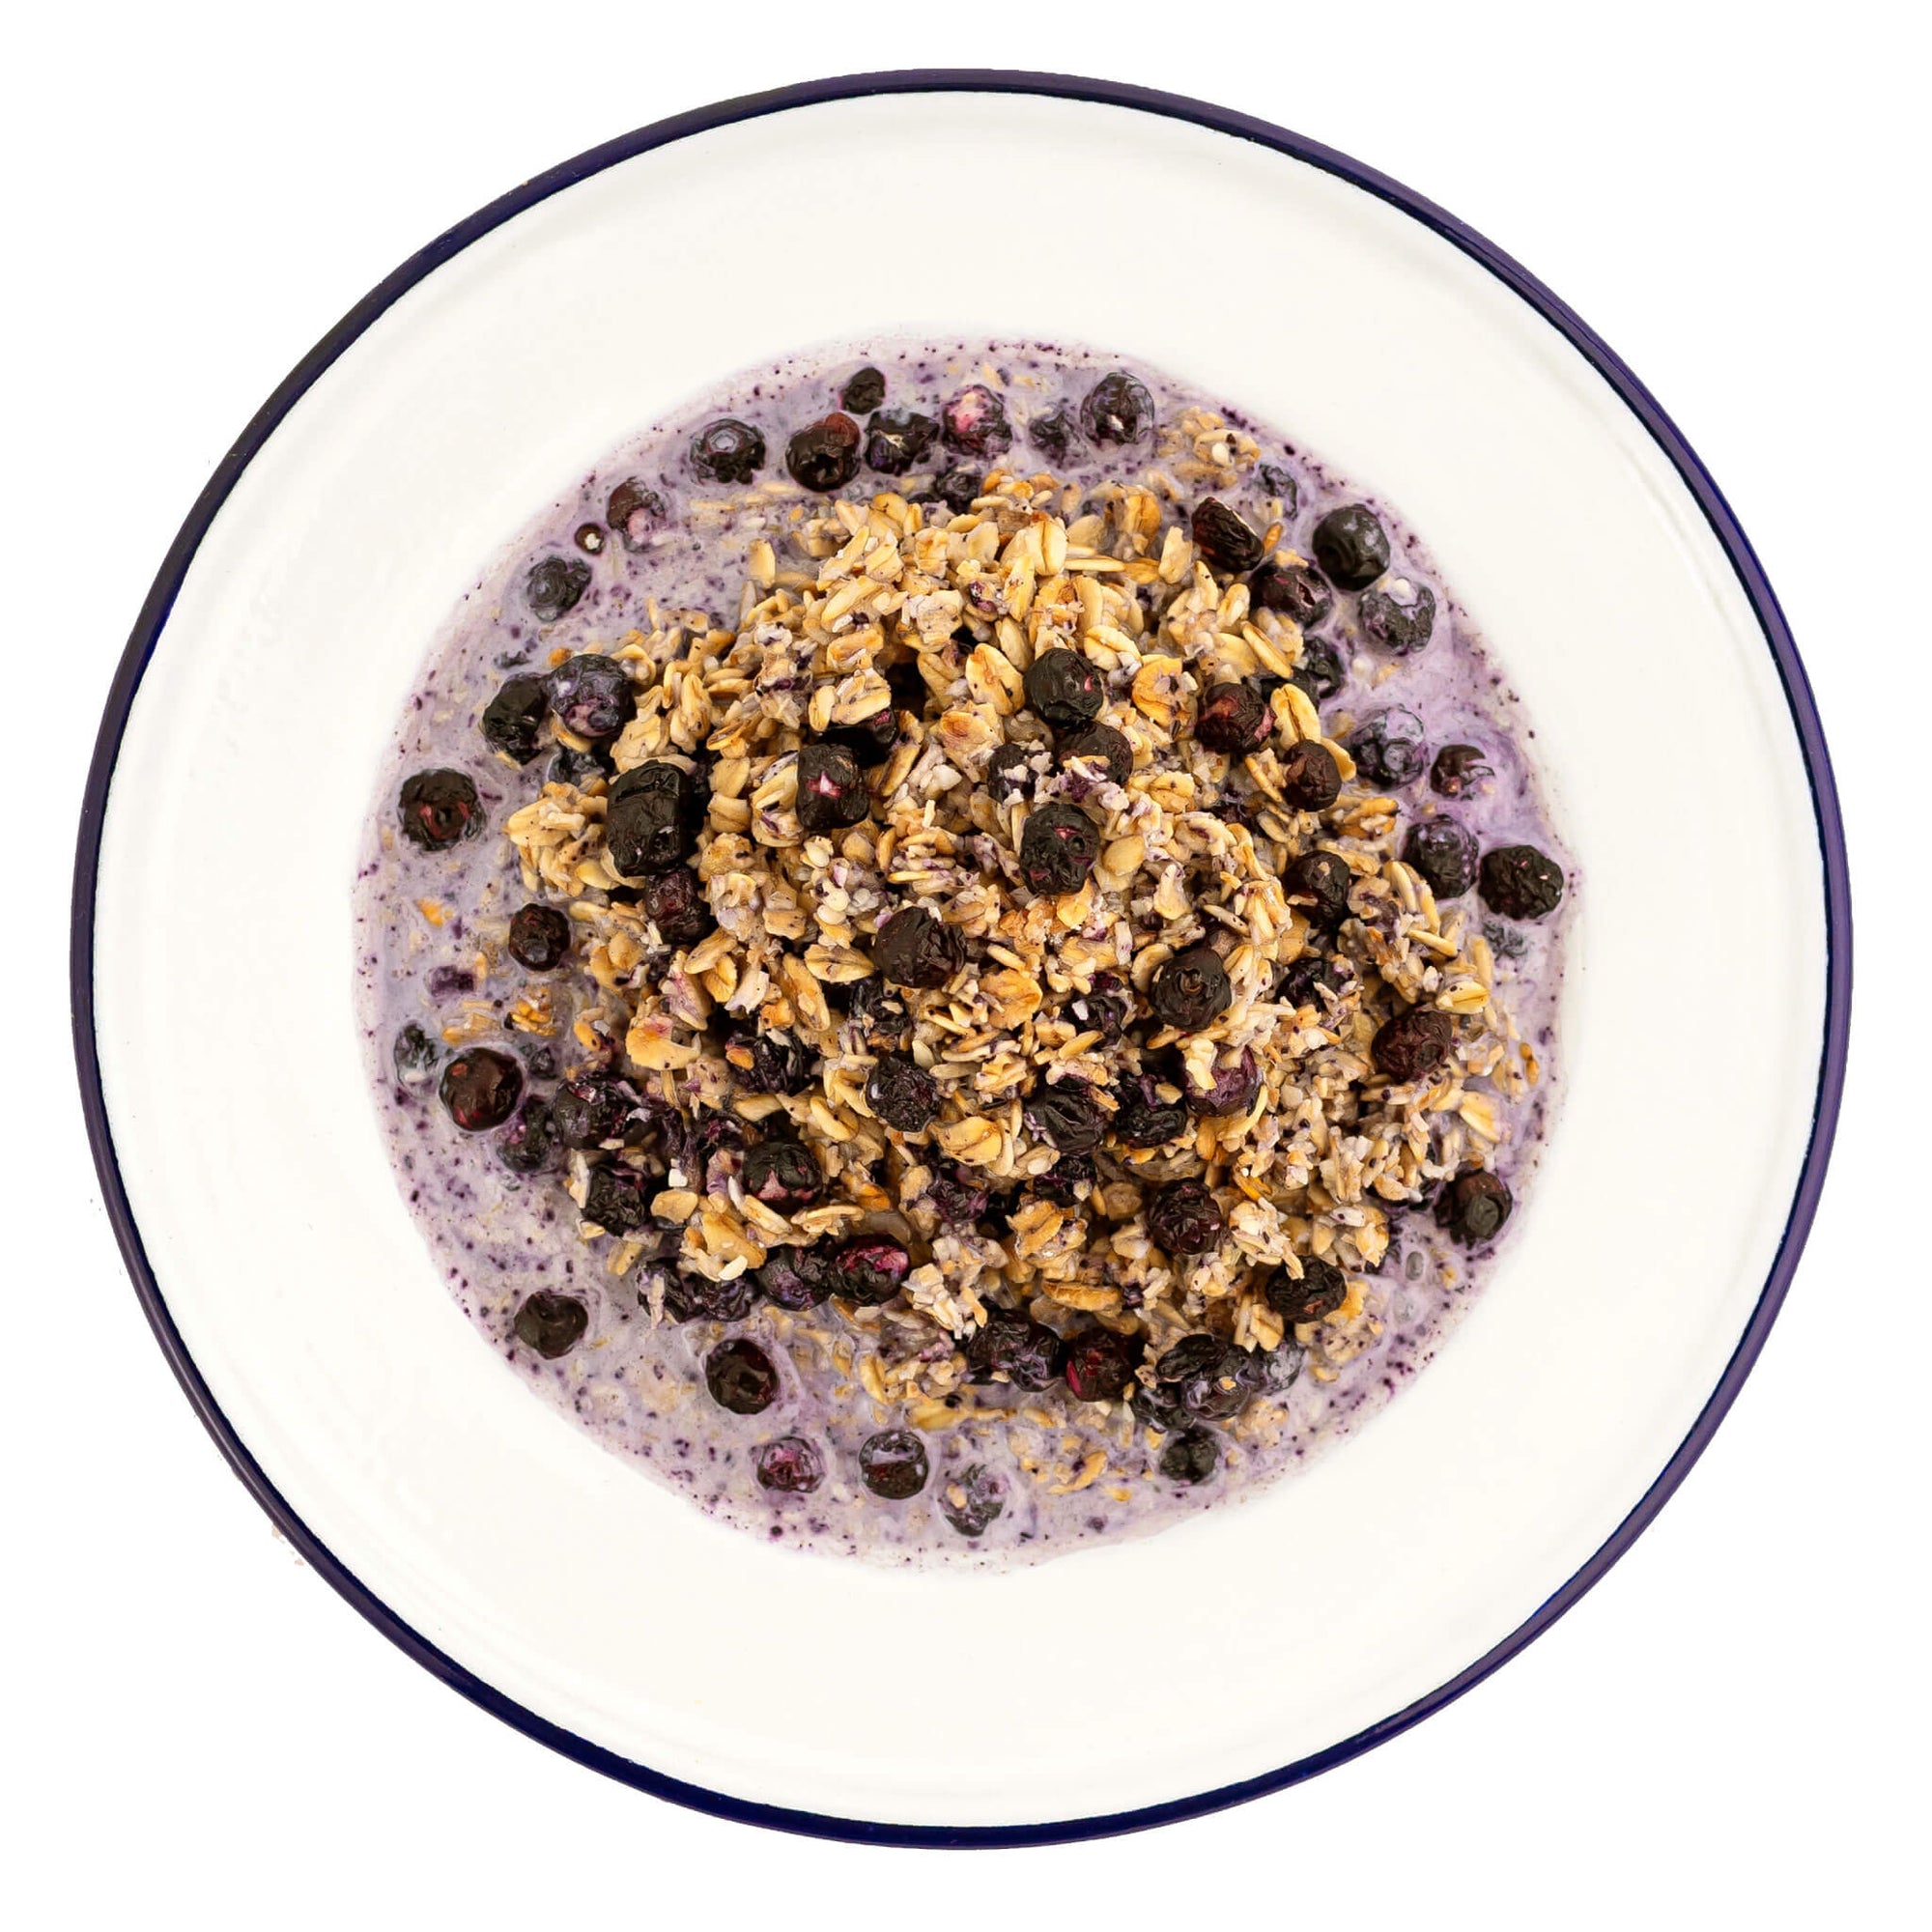 634449 Granola with Milk & Blueberries prepared military ration